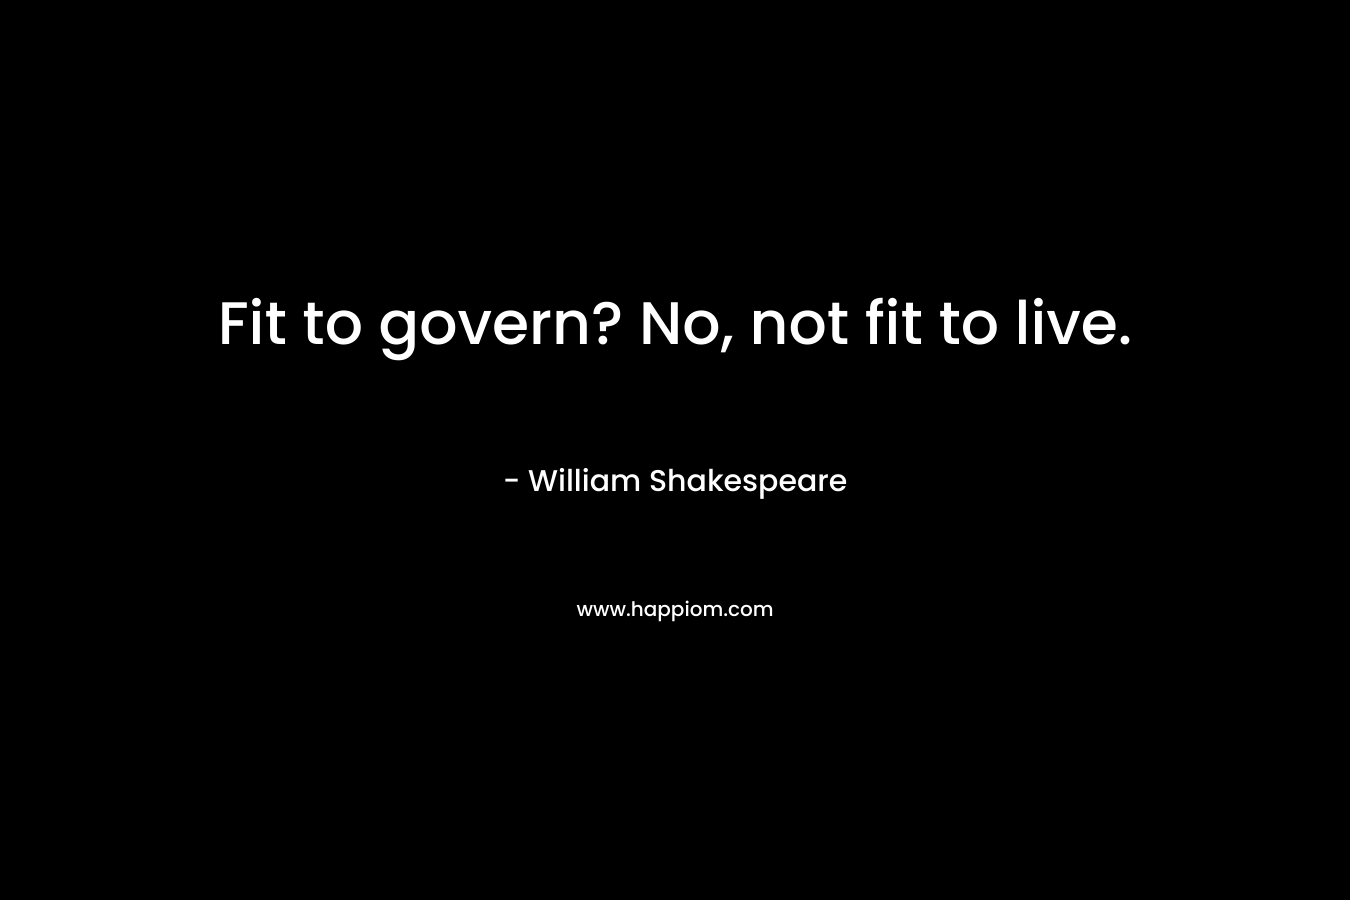 Fit to govern? No, not fit to live. – William Shakespeare